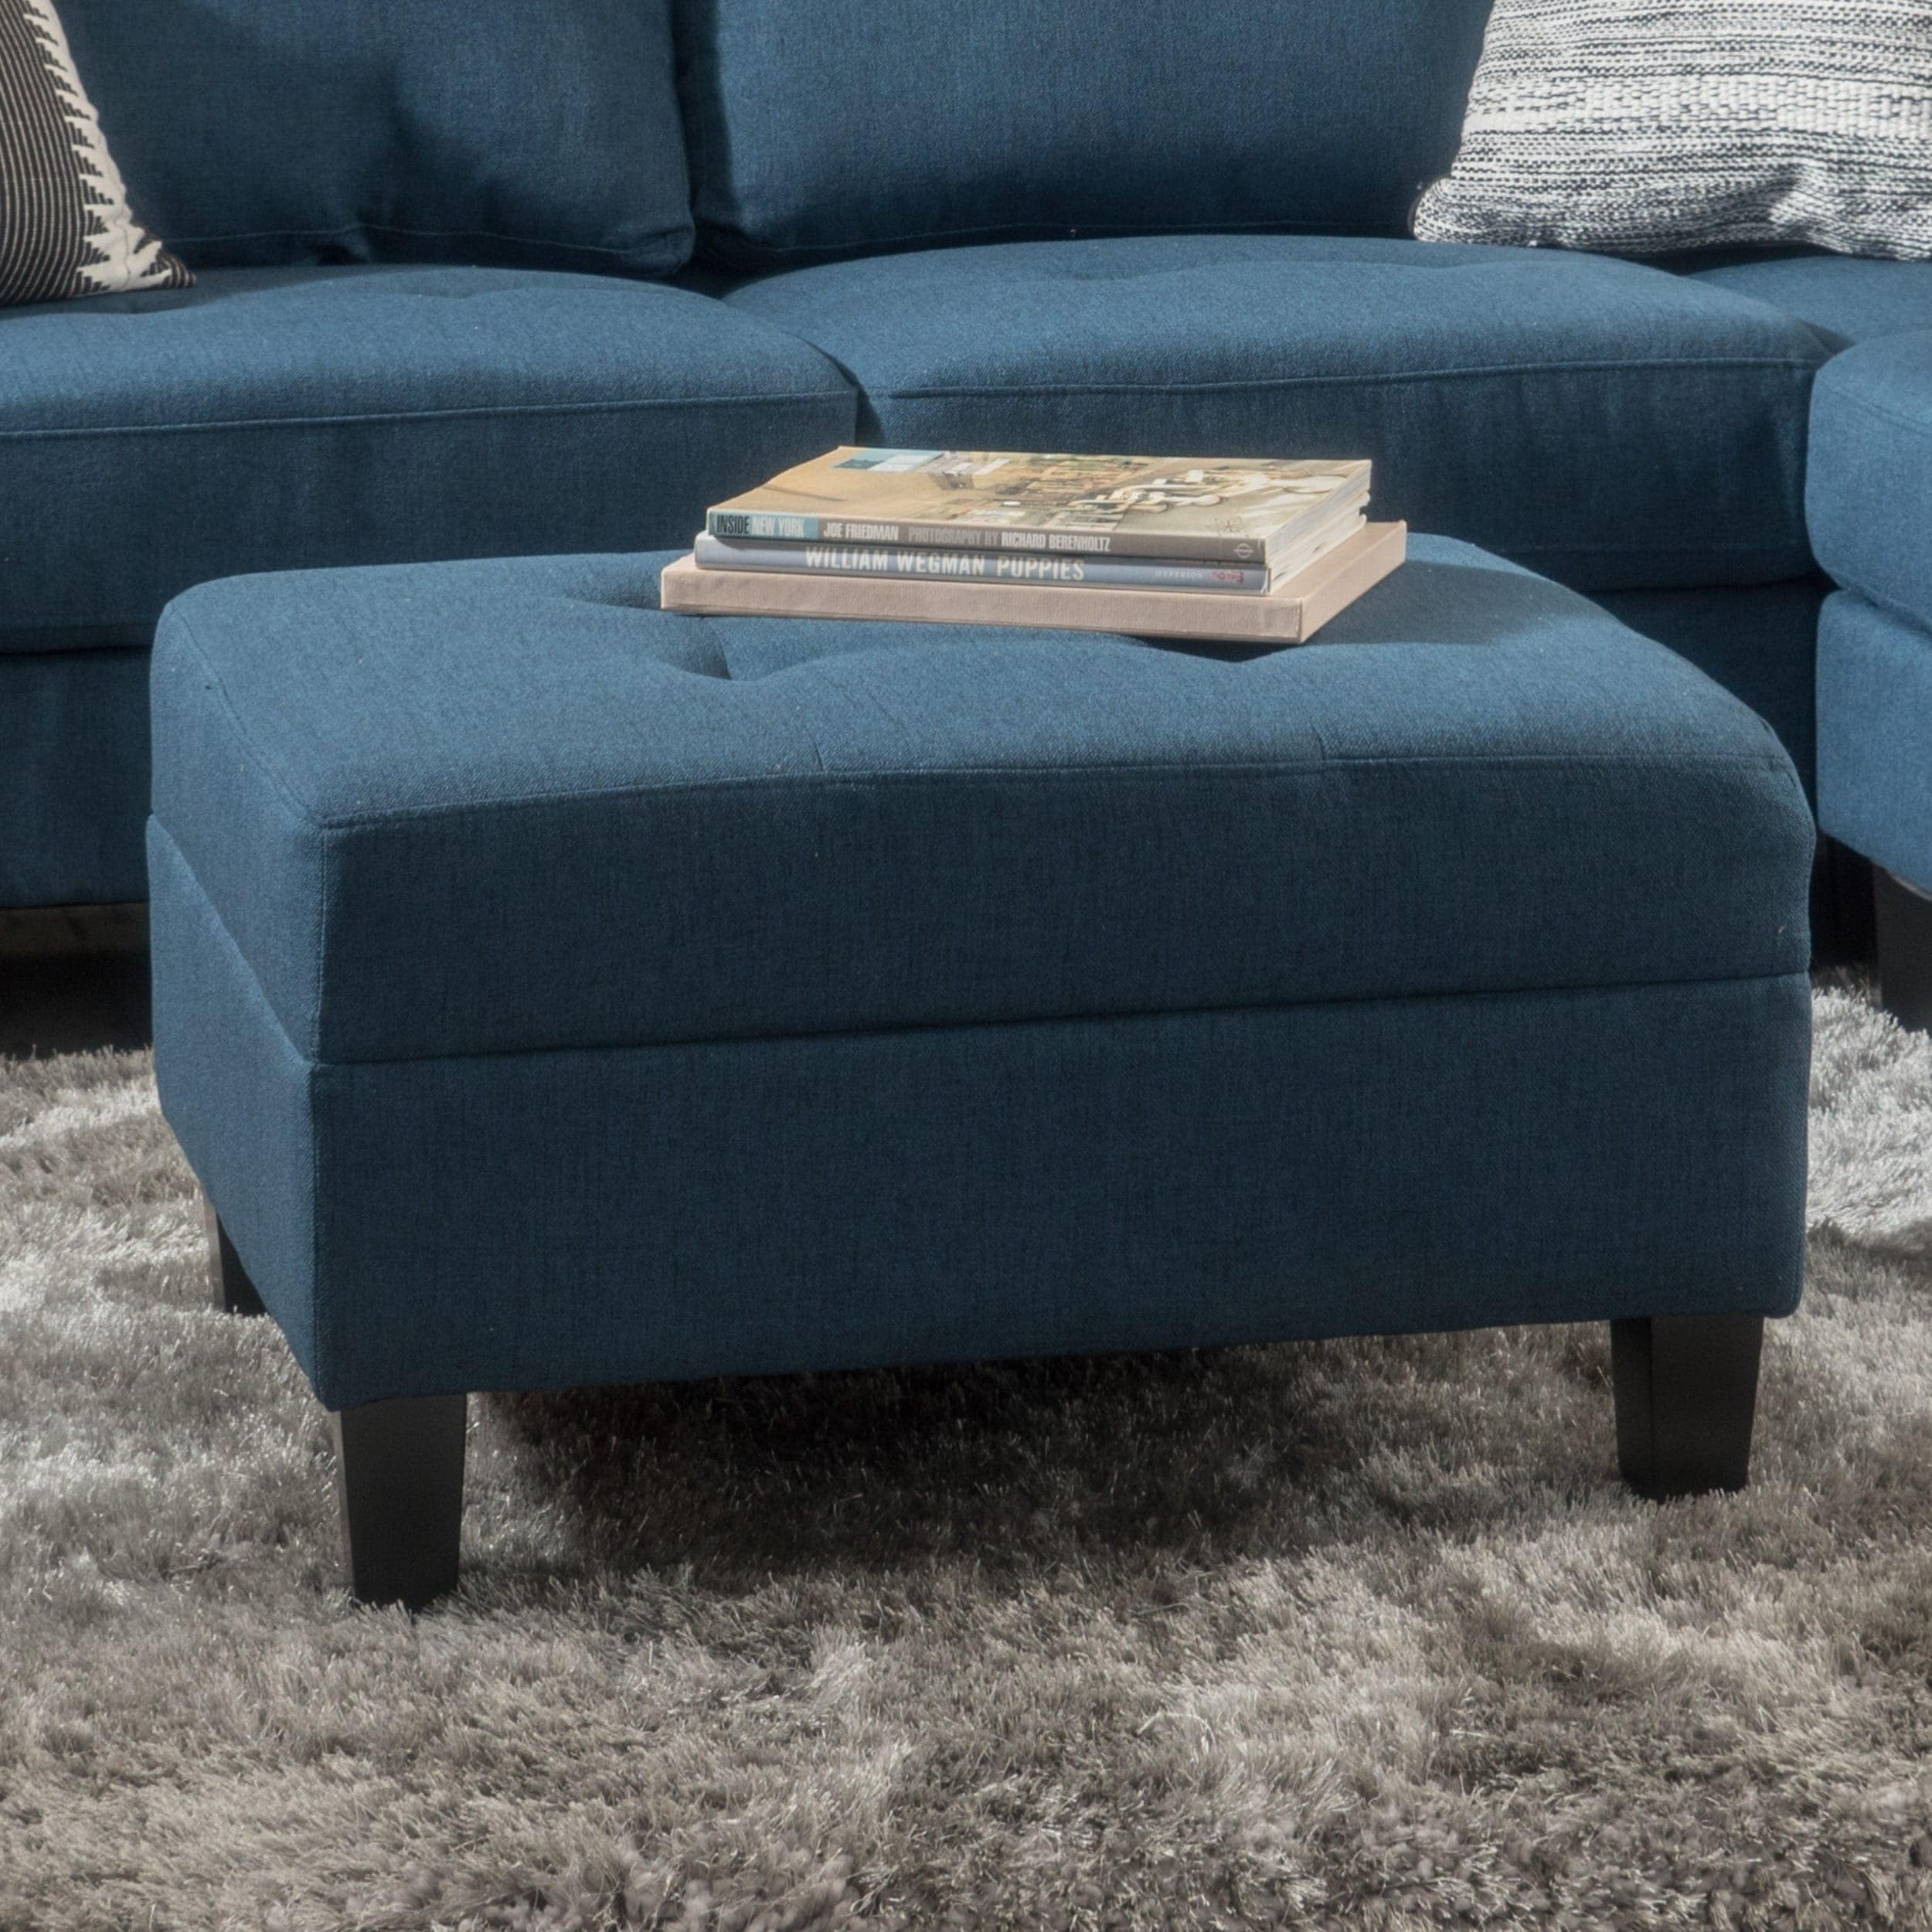 https://ak1.ostkcdn.com/images/products/is/images/direct/6364c302aa027022b857c3c60cc9e0b796eba85d/Zahra-Tufted-Fabric-Ottoman-by-Christopher-Knight-Home.jpg